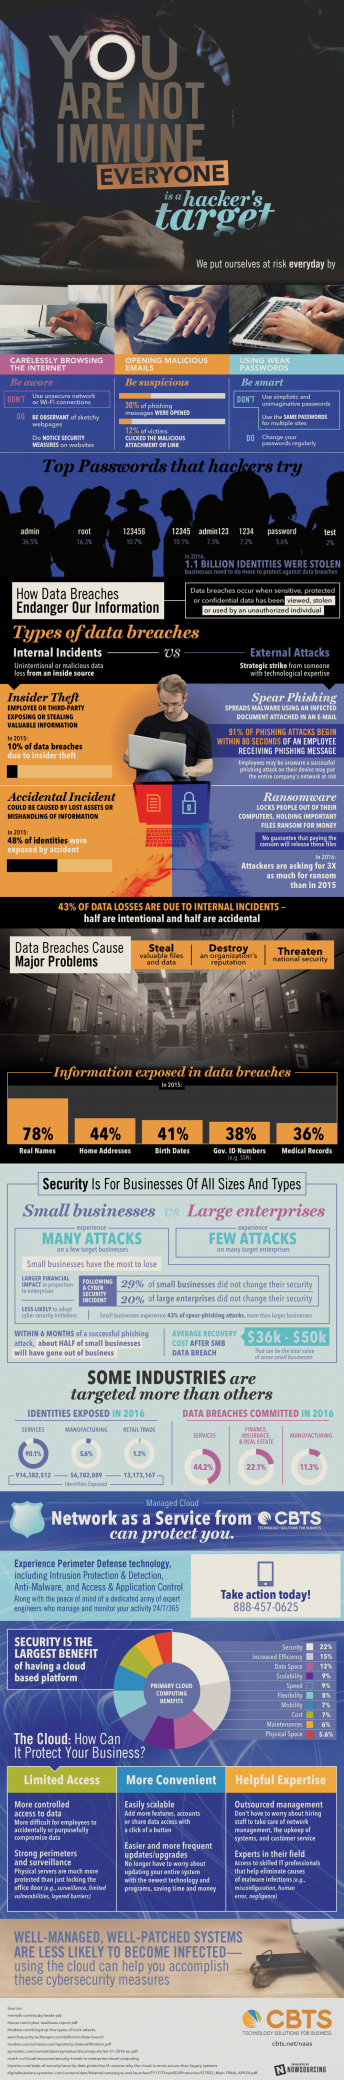 Network Security Is For All Businesses [Infographic]